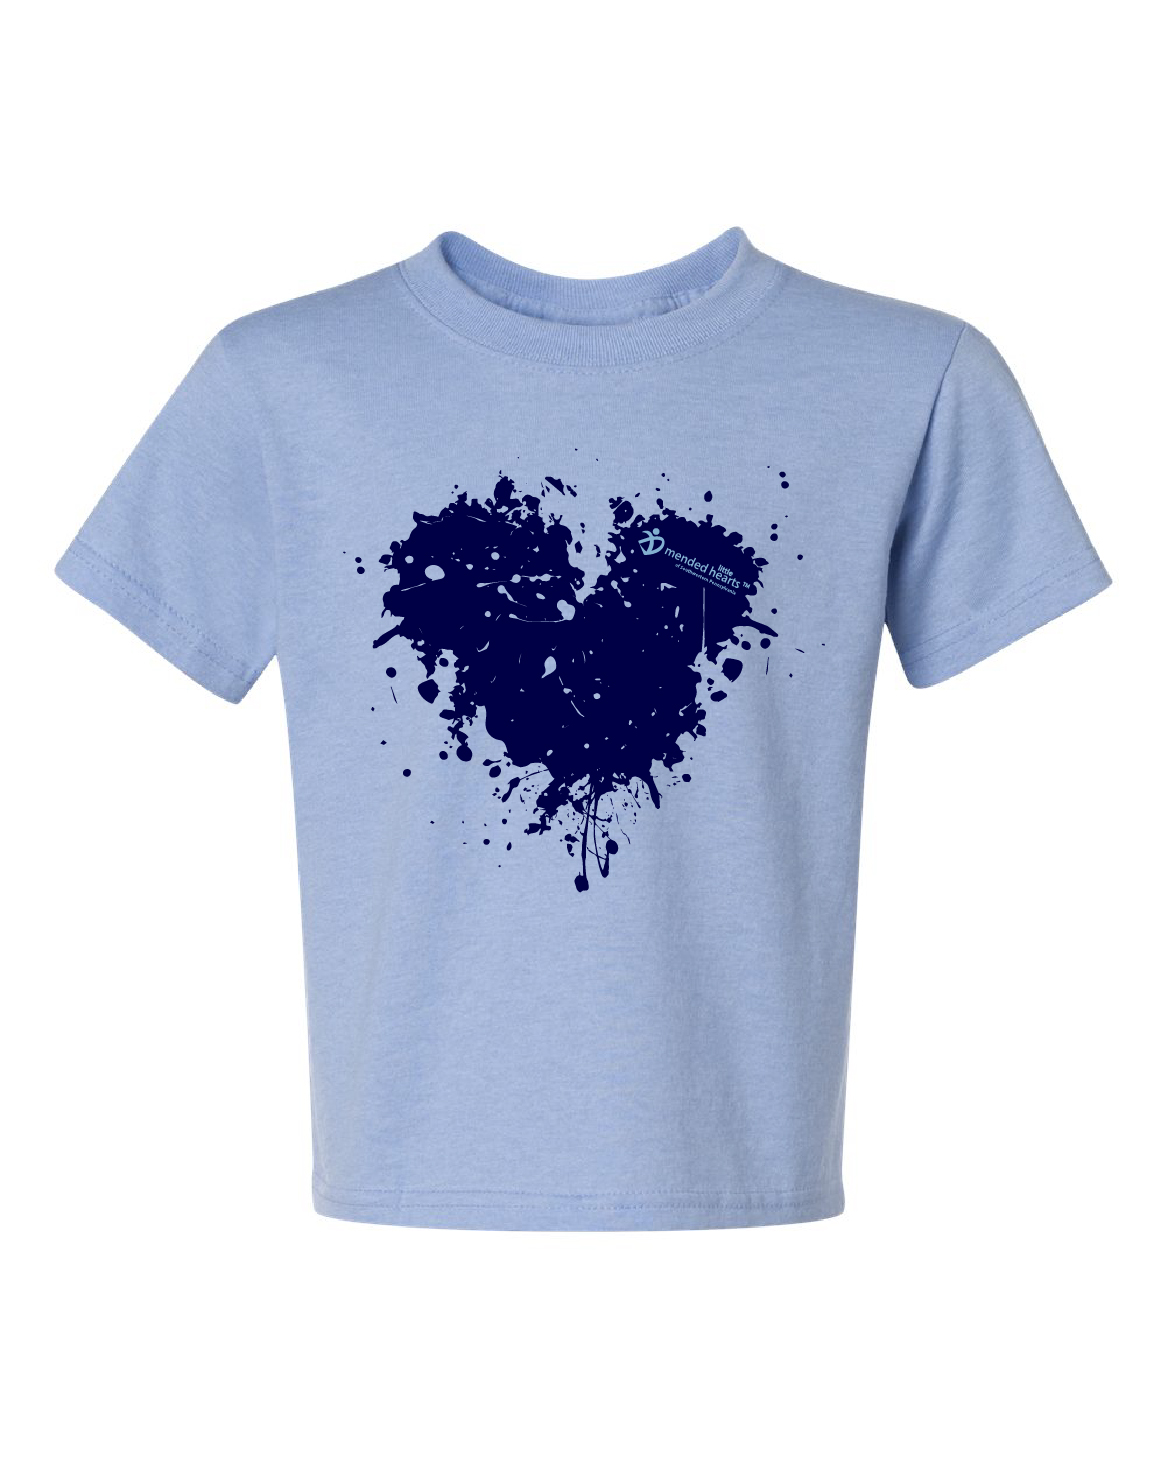 Splatter Heart Youth T-Shirt Available in Multiple Colors